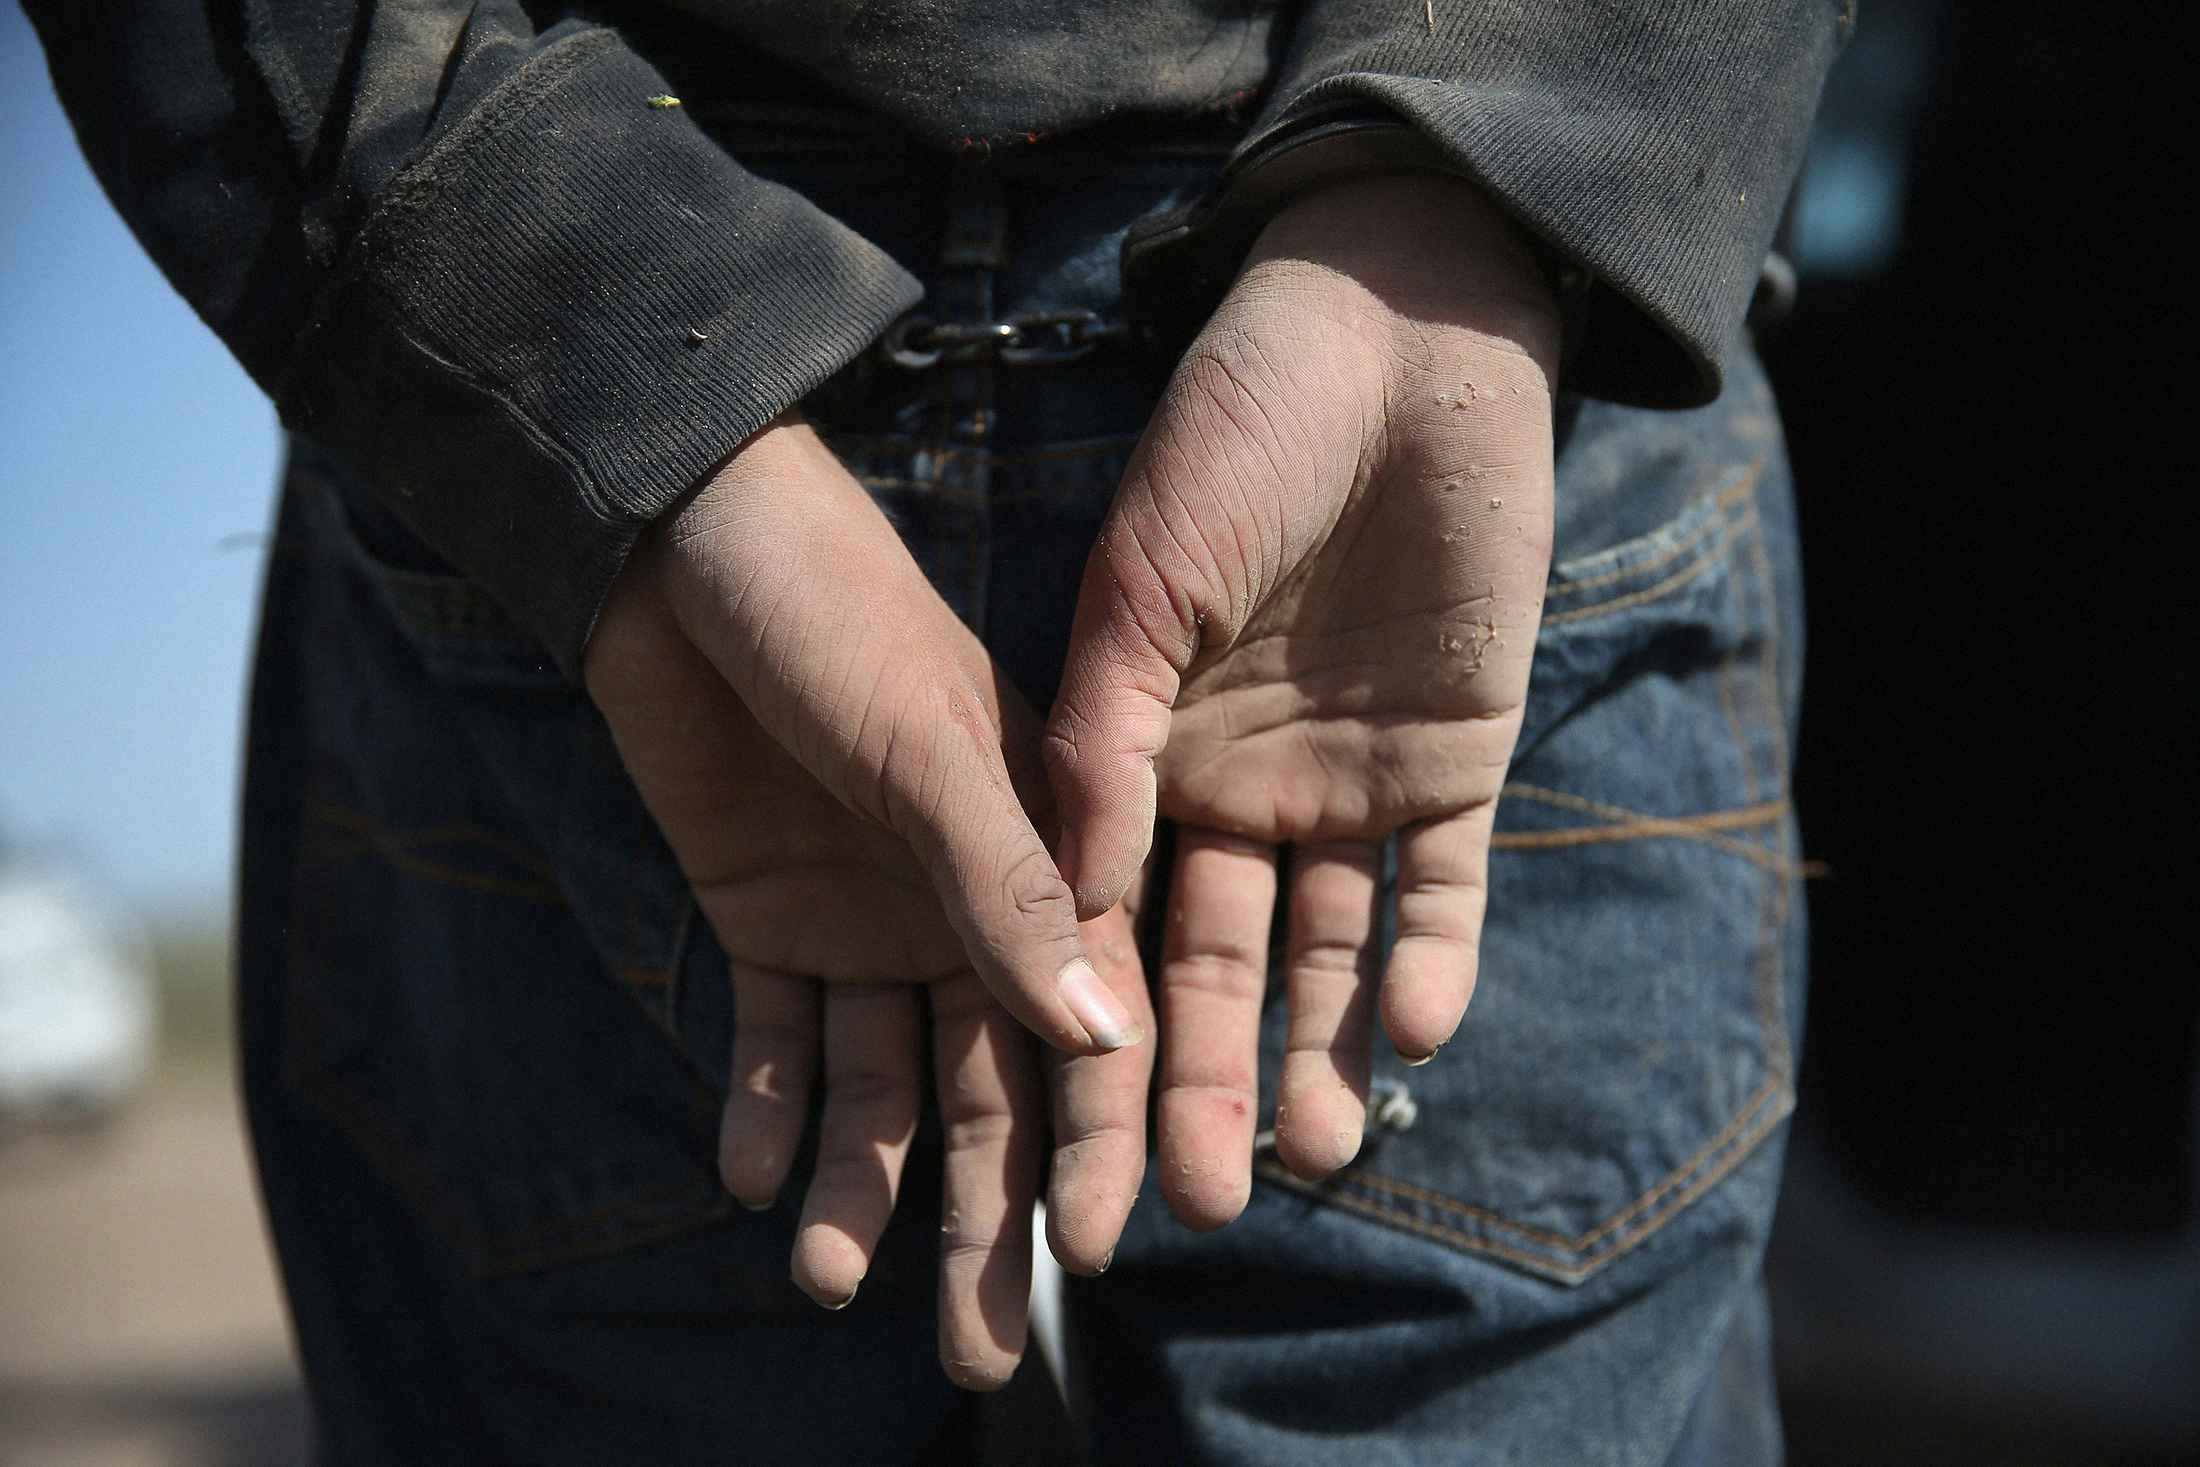 An undocumented immigrant is detained by the U.S. Border Patrol near the U.S.-Mexico border.
